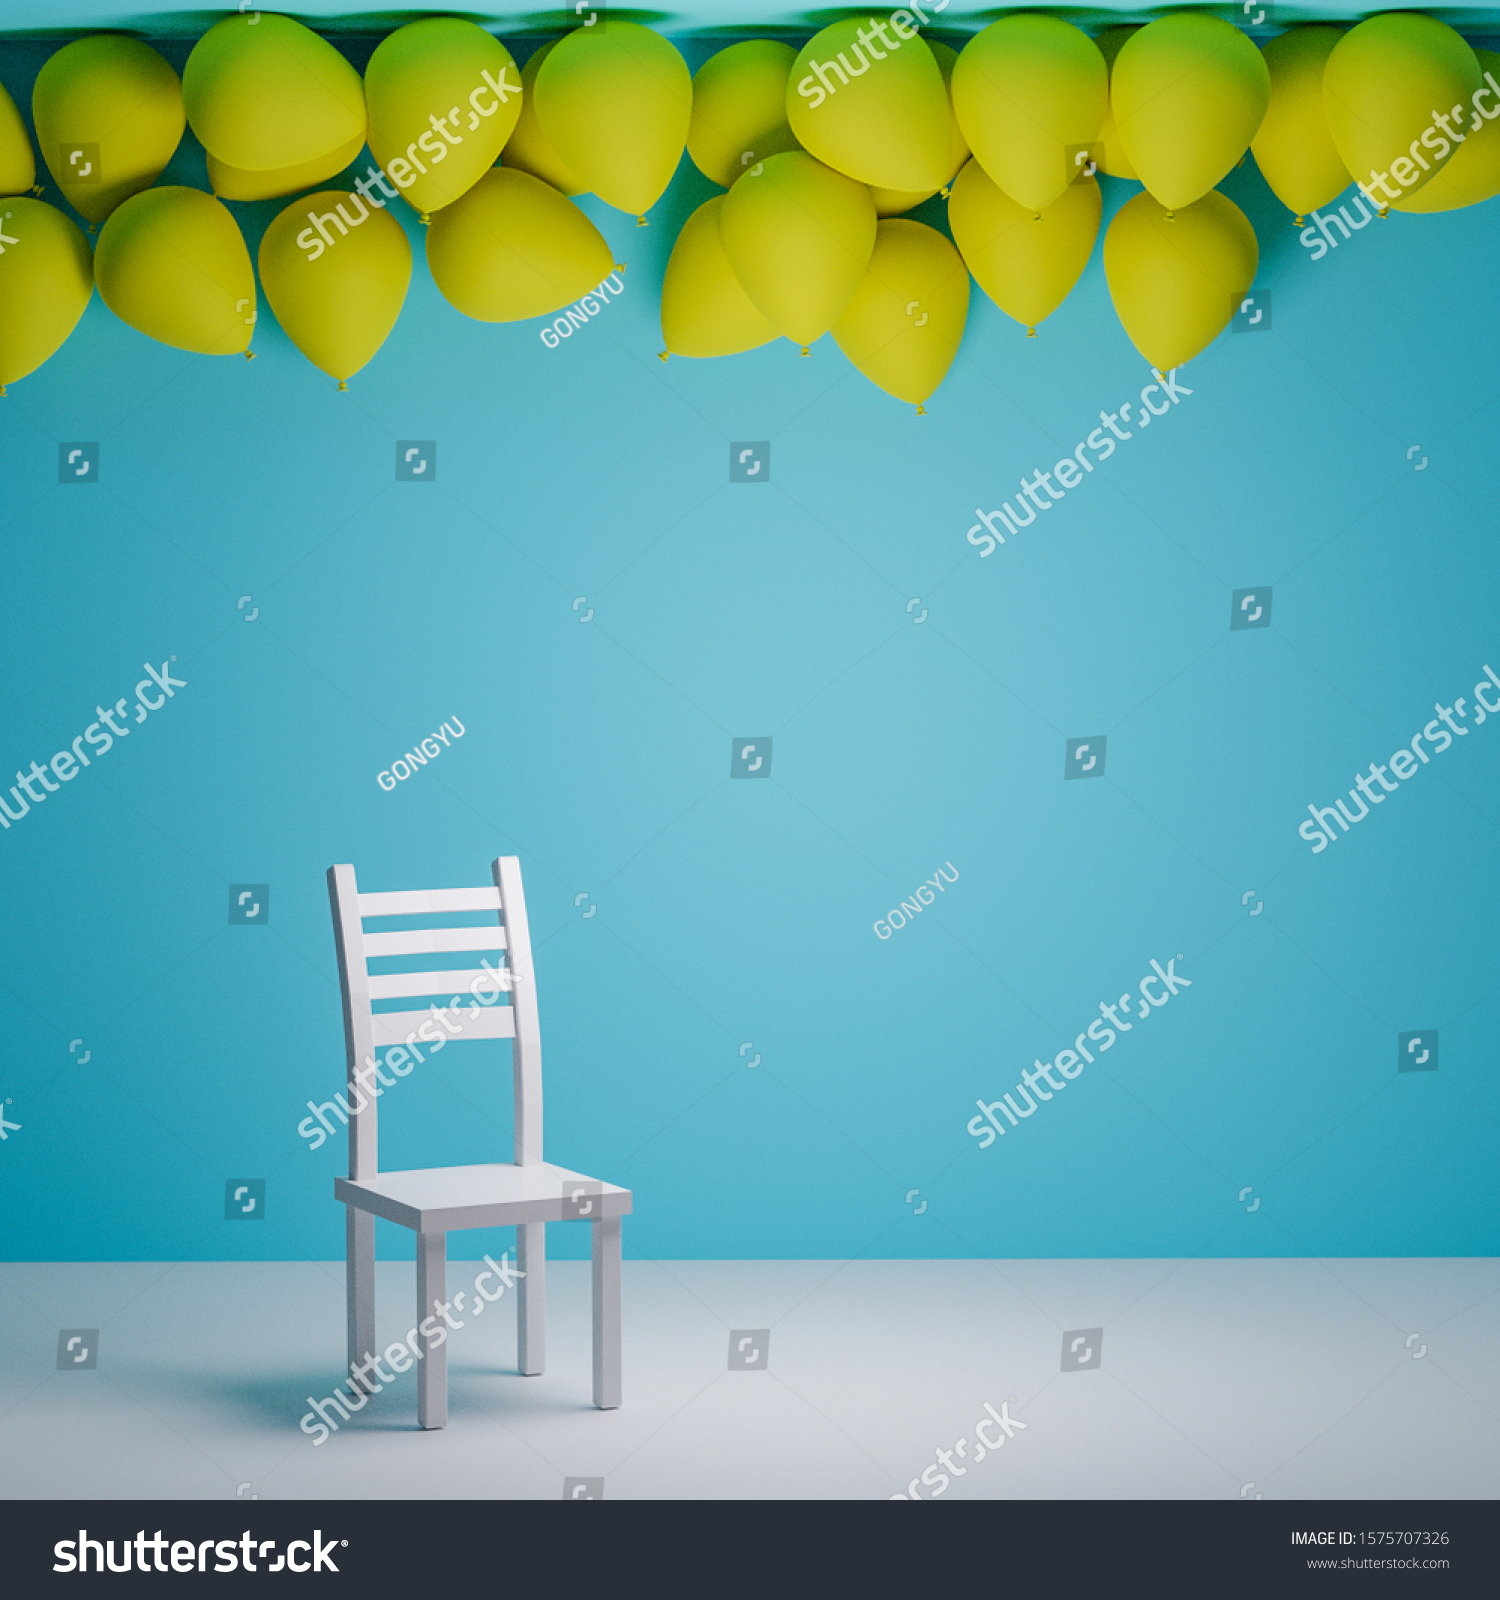 yellow balloons floating in front of a light blue wall, a white chair standing still. 3D rendering #1575707326